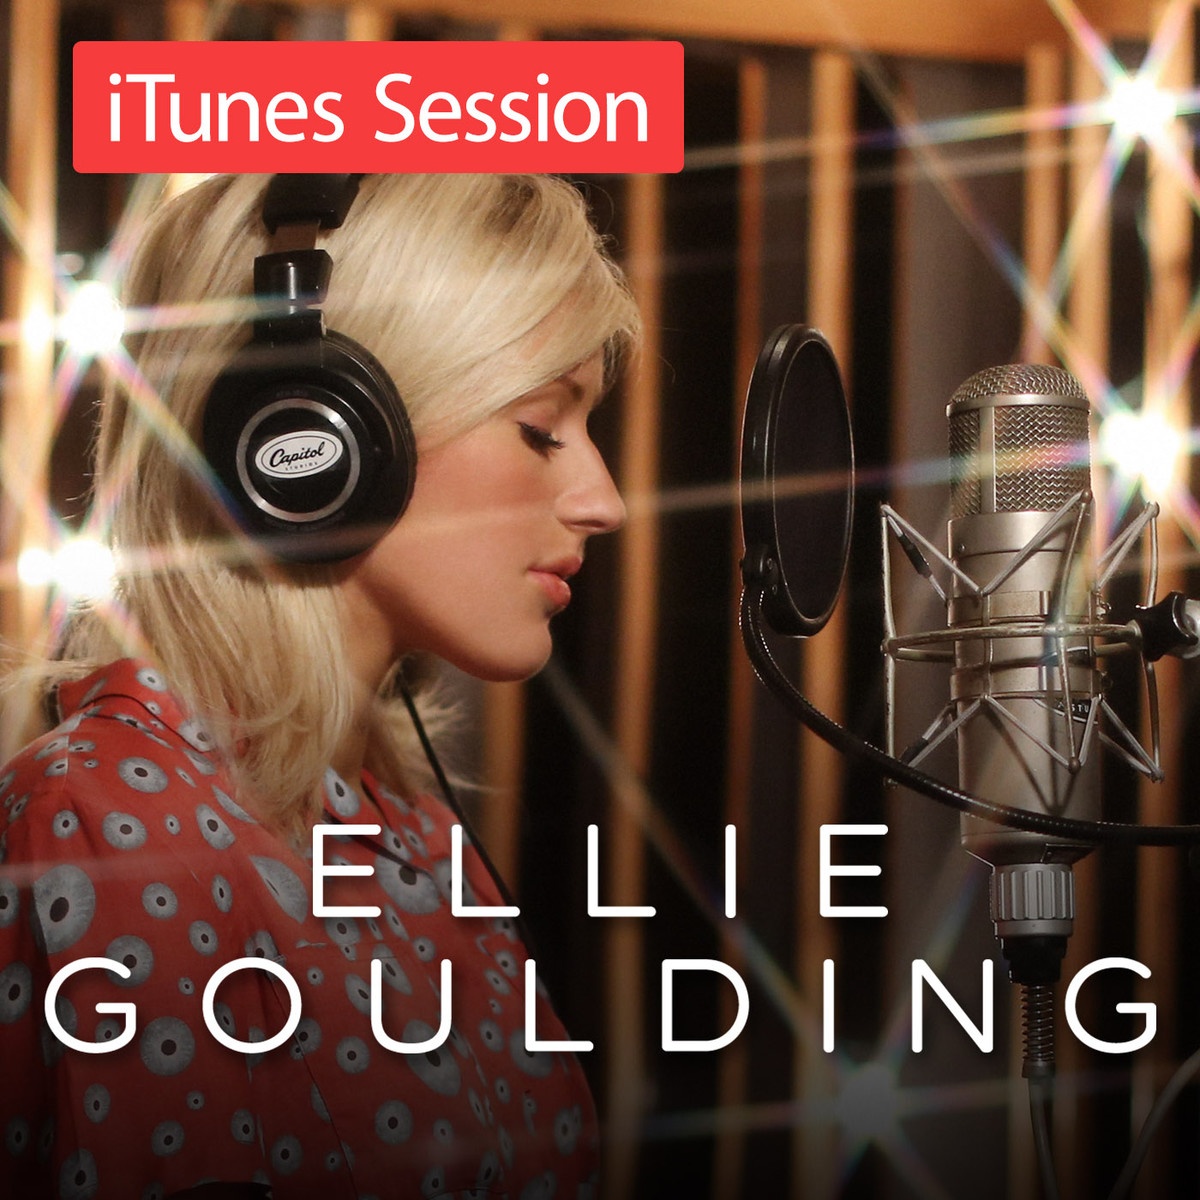 Starry Eyed (iTunes Session)